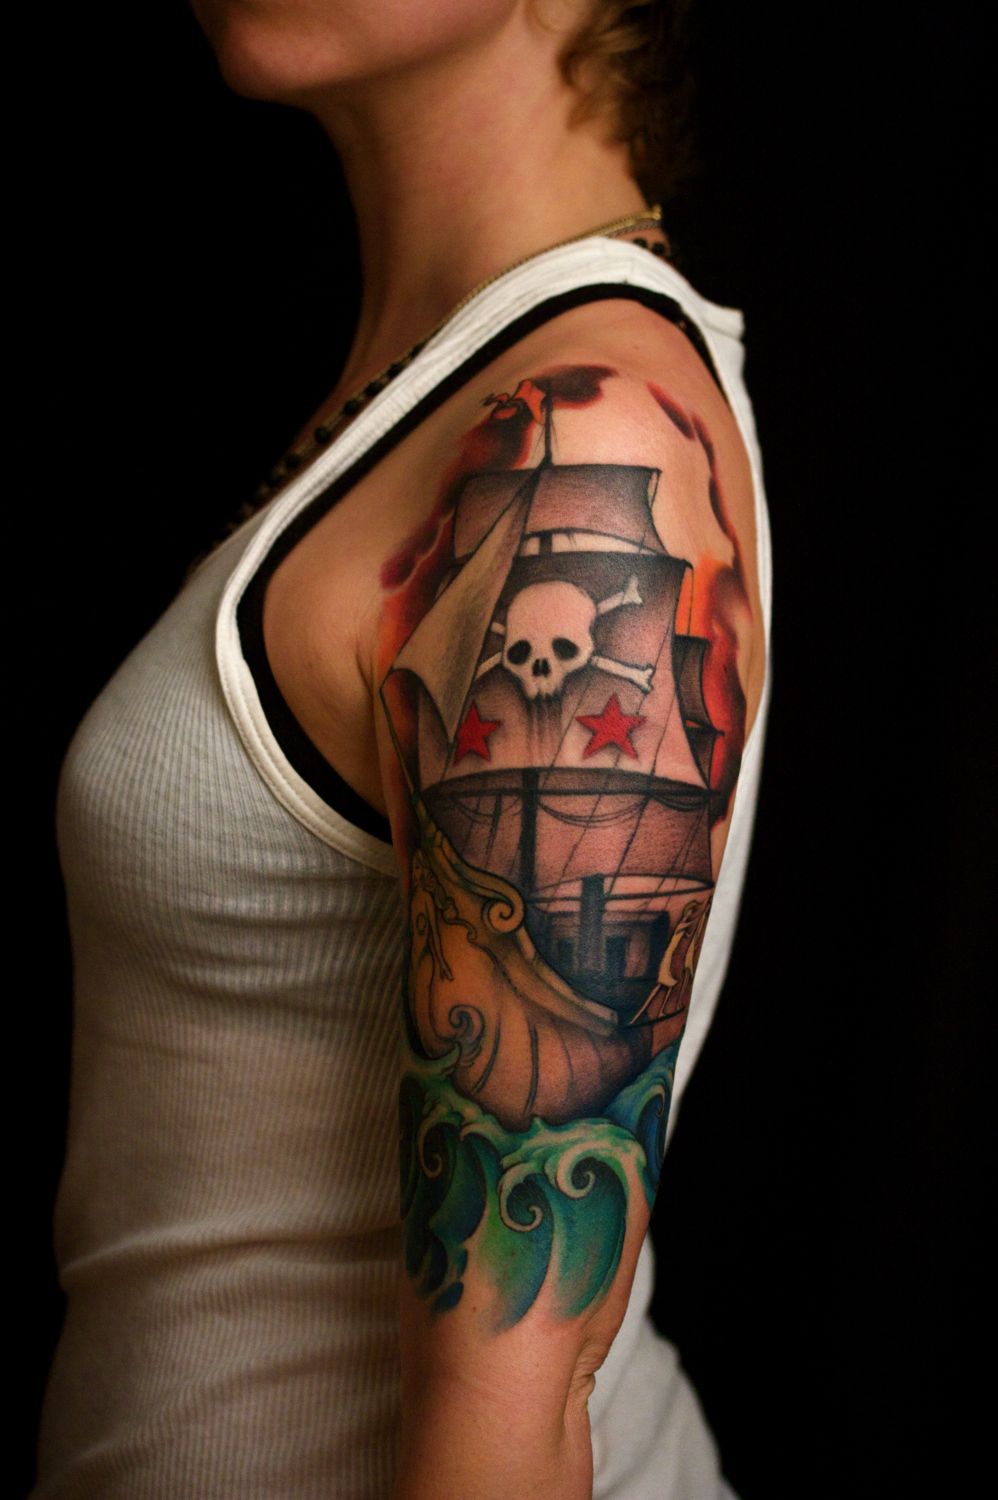 Pirate Tattoos Designs, Ideas and Meaning | Tattoos For You